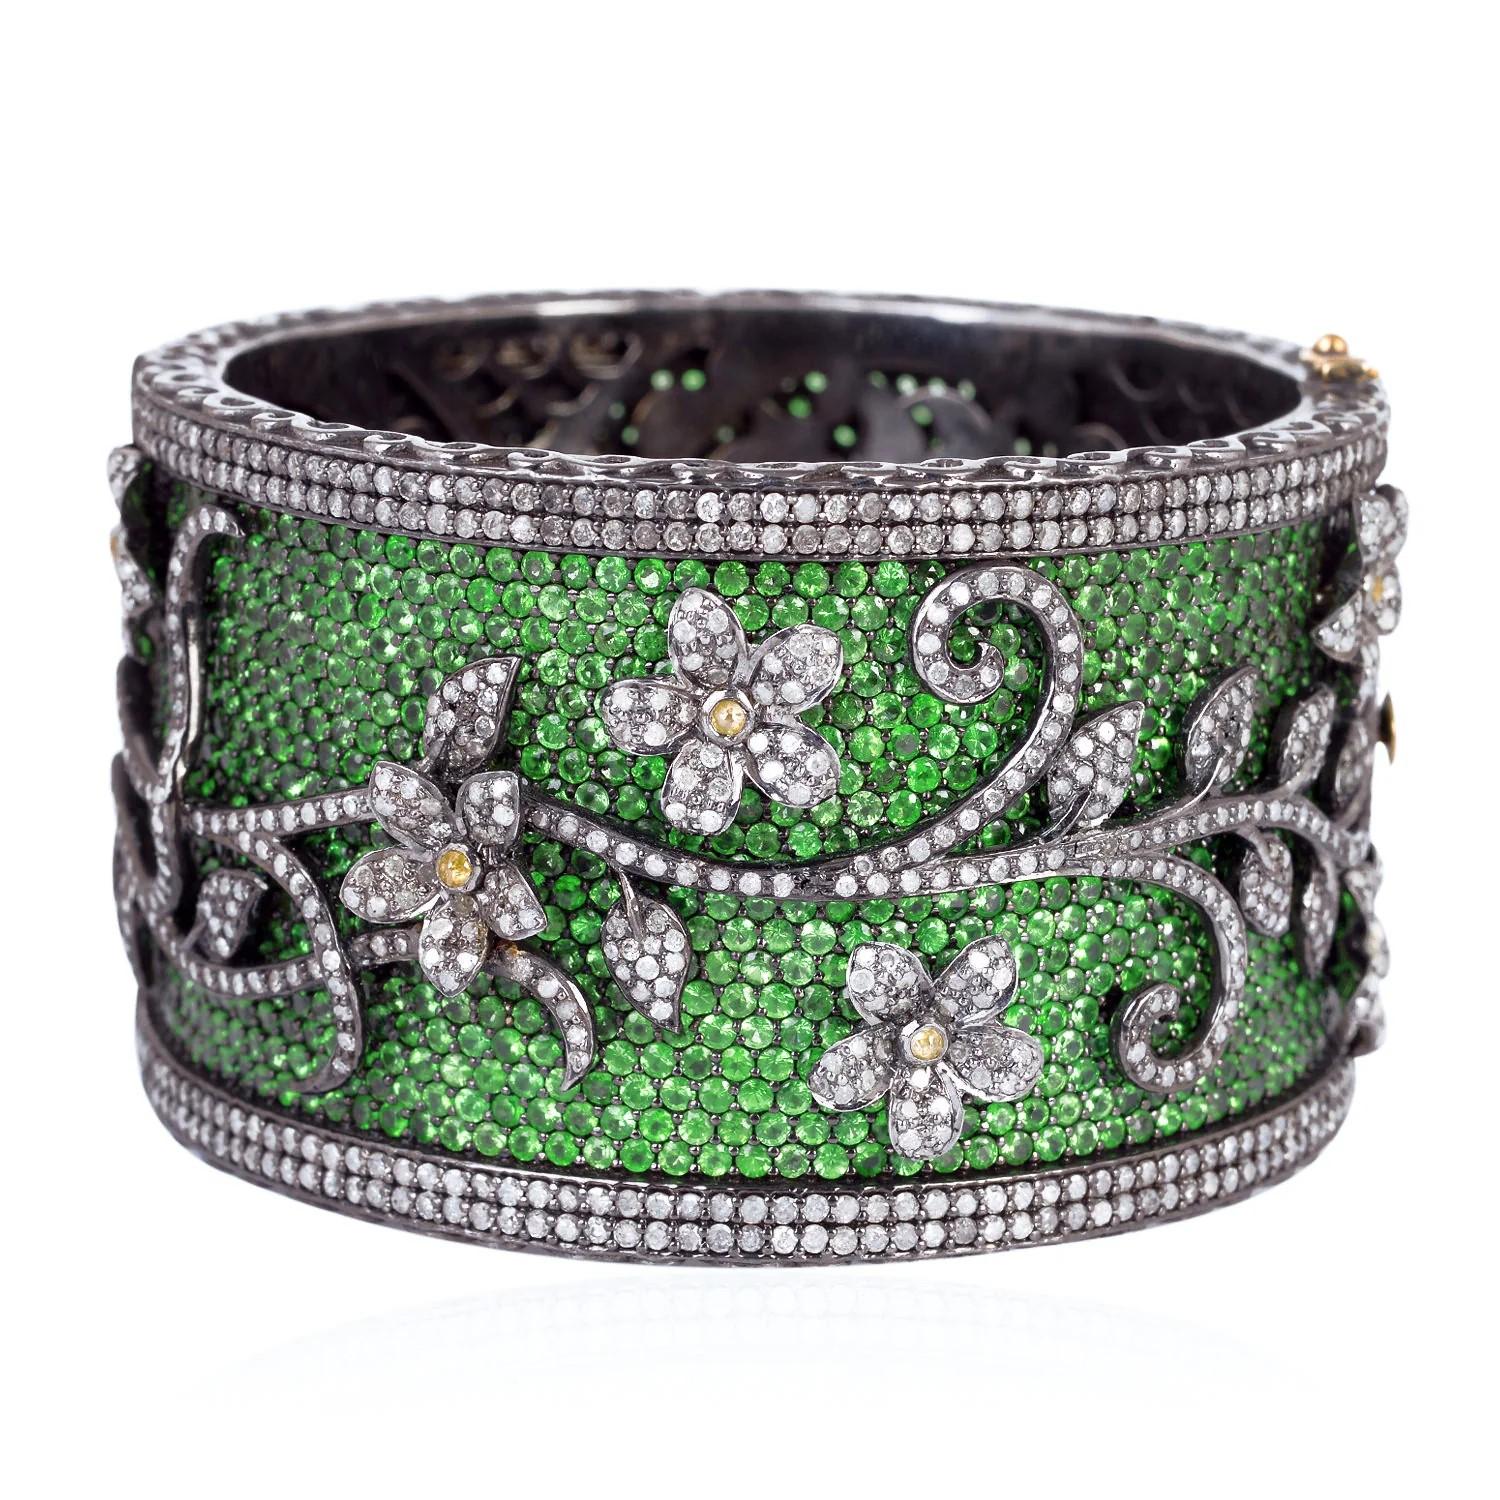 Inspired by the Mughal Era, a stunning statement bracelet handmade in 14K gold and sterling silver. It is set in 51.84 carats tsavorite and 15.66 carats of diamonds in blackened finish. A true masterpiece.  Clasp Closure.  Part of our Vintage